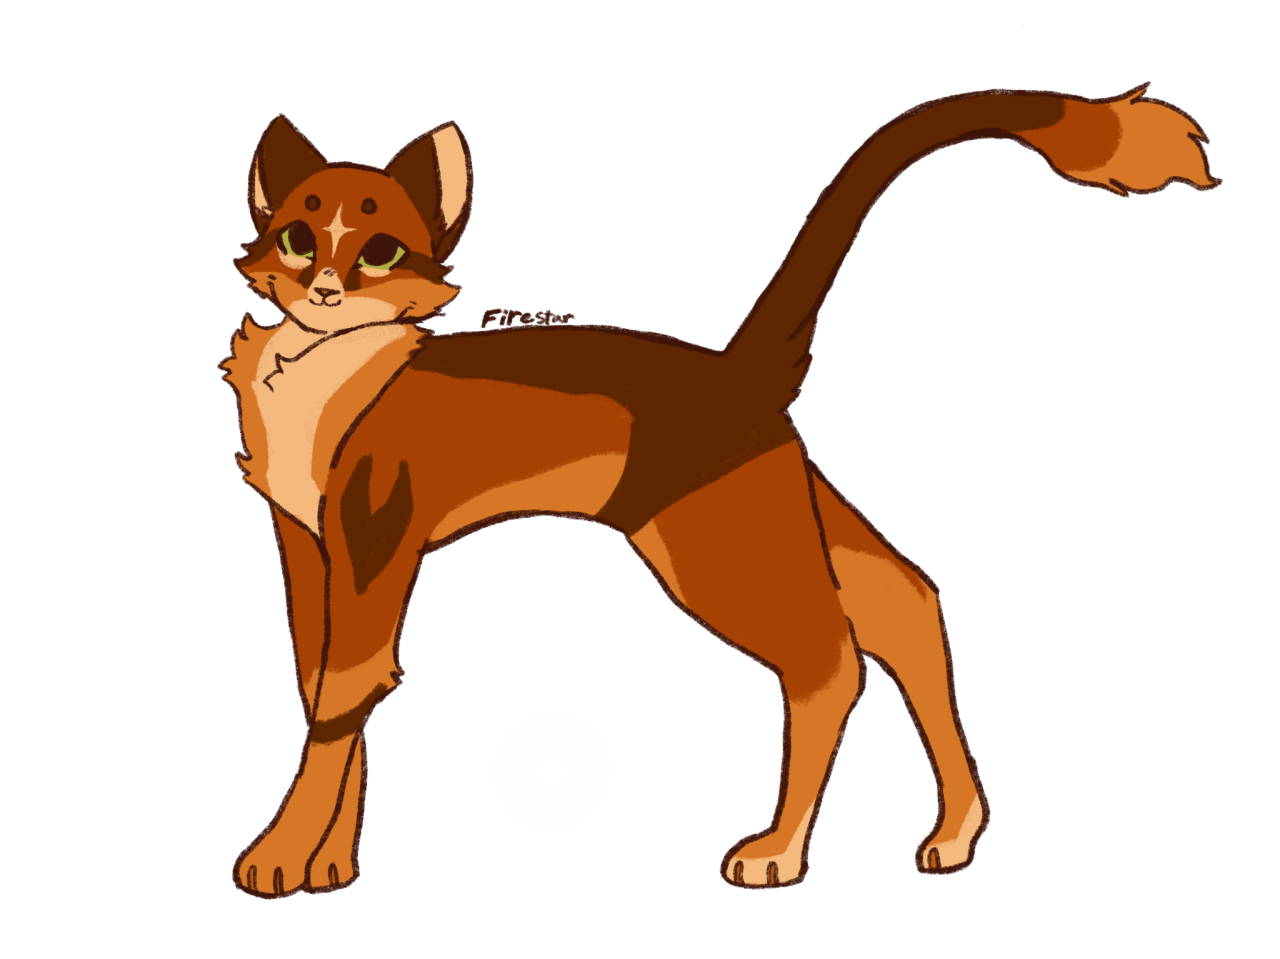 What if FIRESTAR and SPOTTEDLEAF Had Kittens?! 🐱💕🐱 Warrior Cats